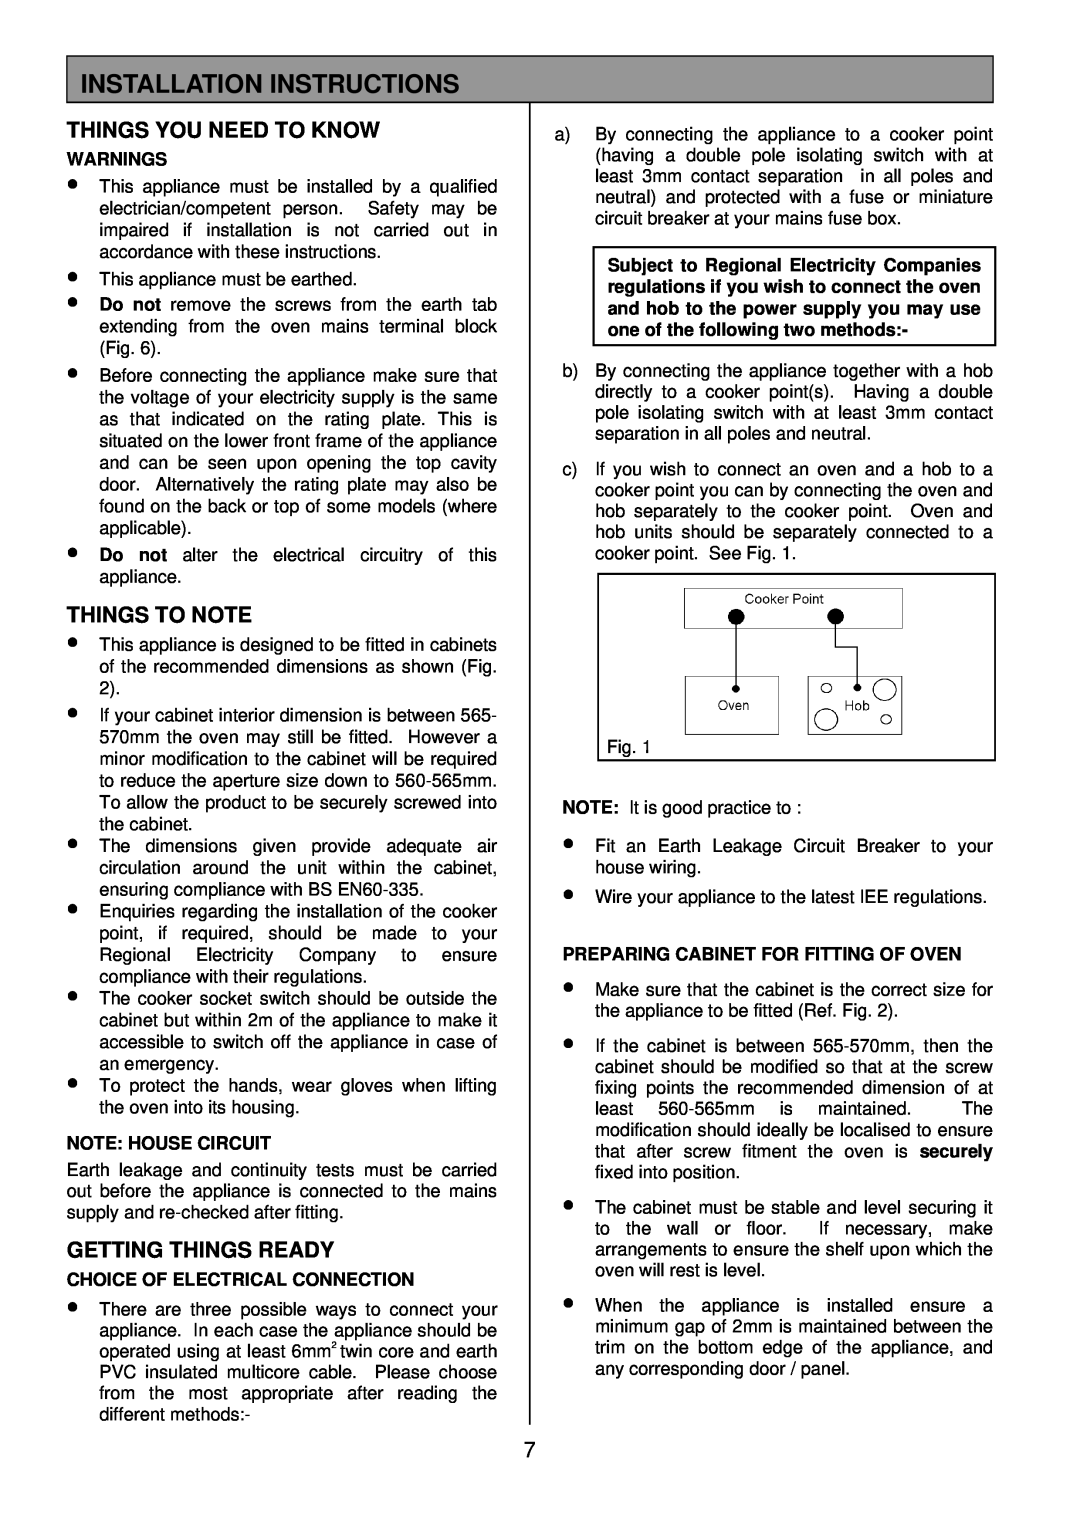 Zanussi ZDQ 895 manual Installation Instructions, Things You Need To Know, Things To Note, Getting Things Ready, Warnings 